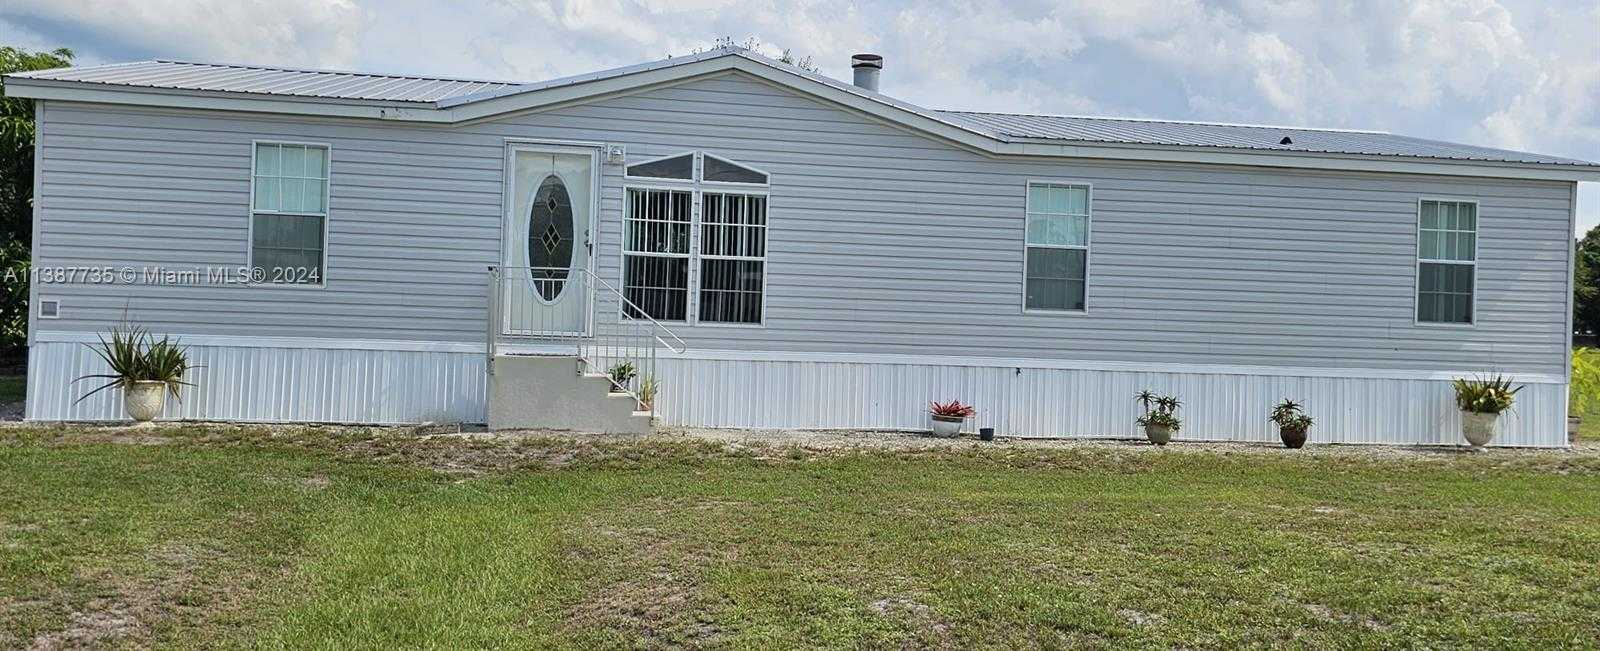 View Clewiston, FL 33440 property